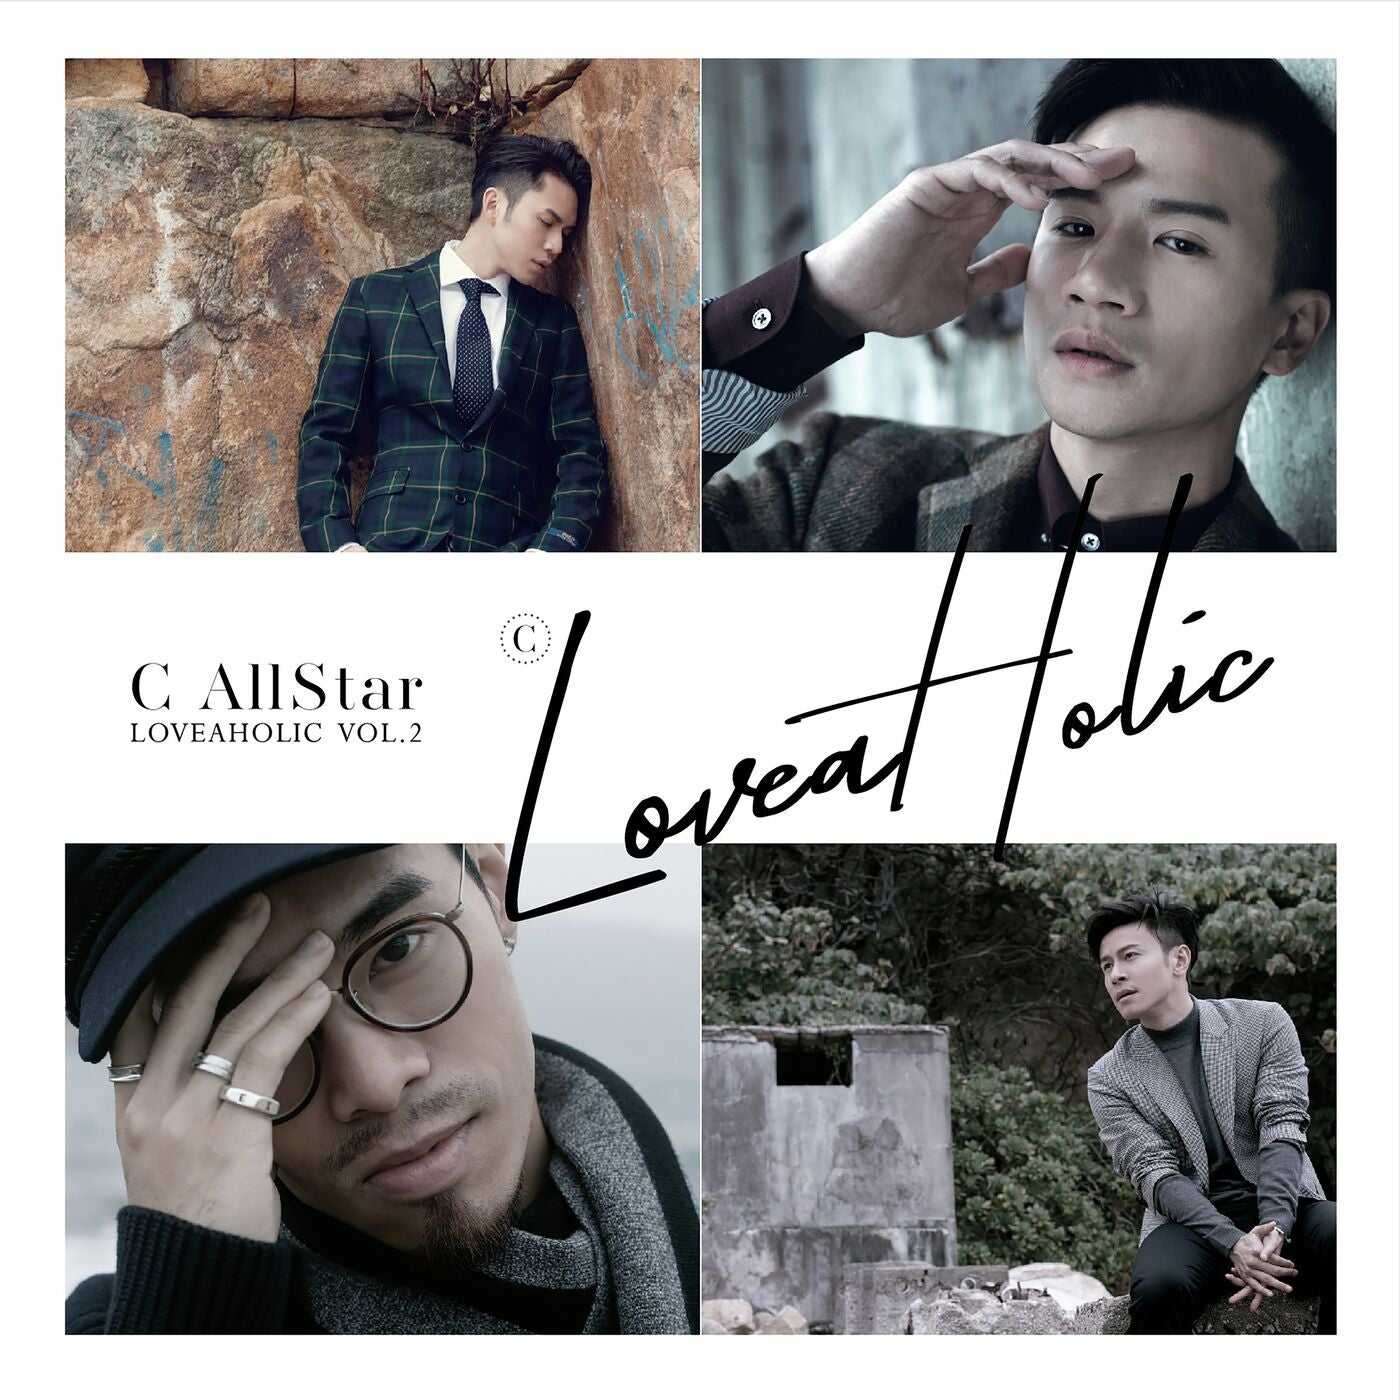 Loveaholic Vol. 2 by Jase, C AllStar, CF, ON, King and William So